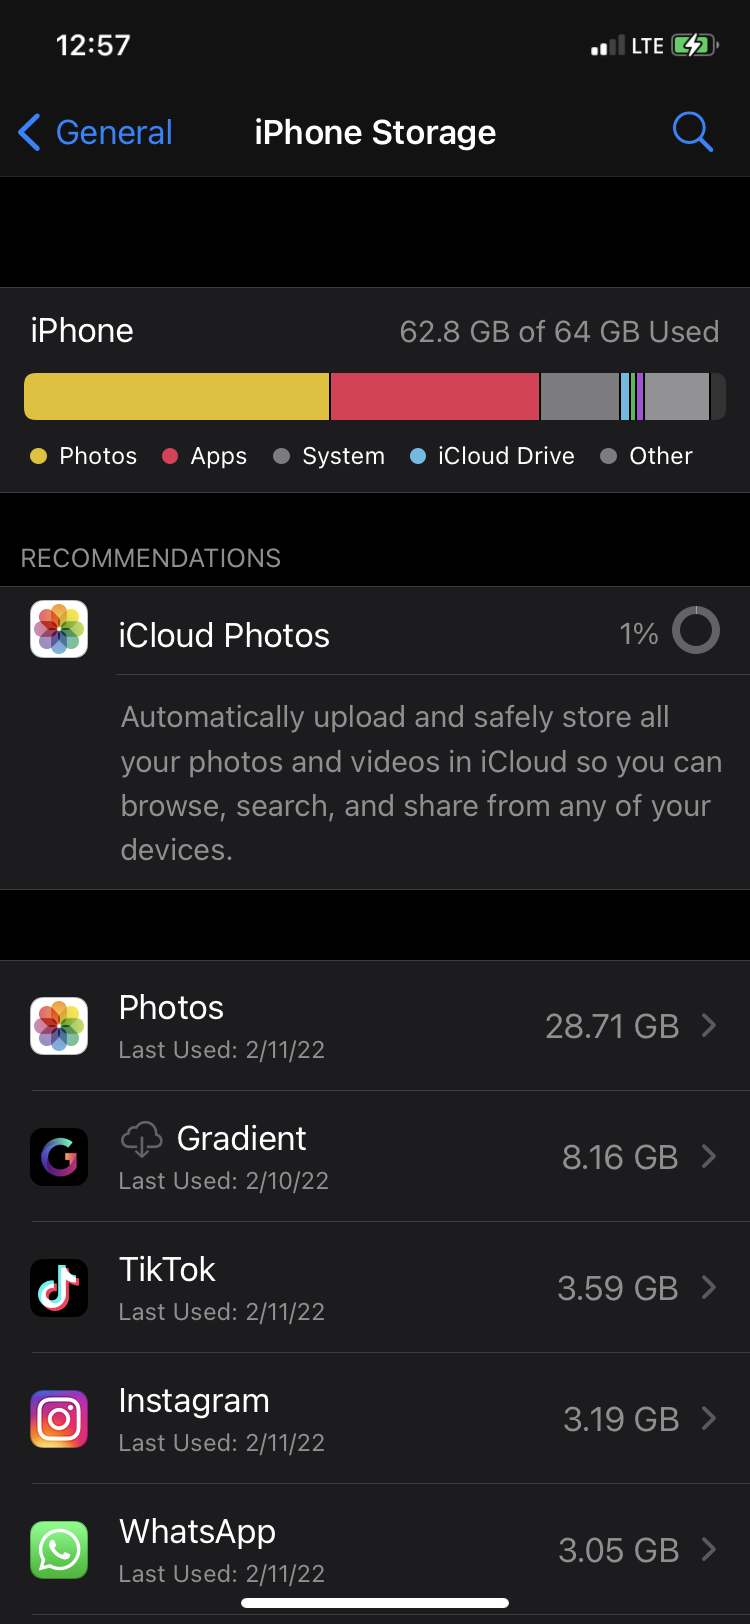 Why is so much of my storage full?